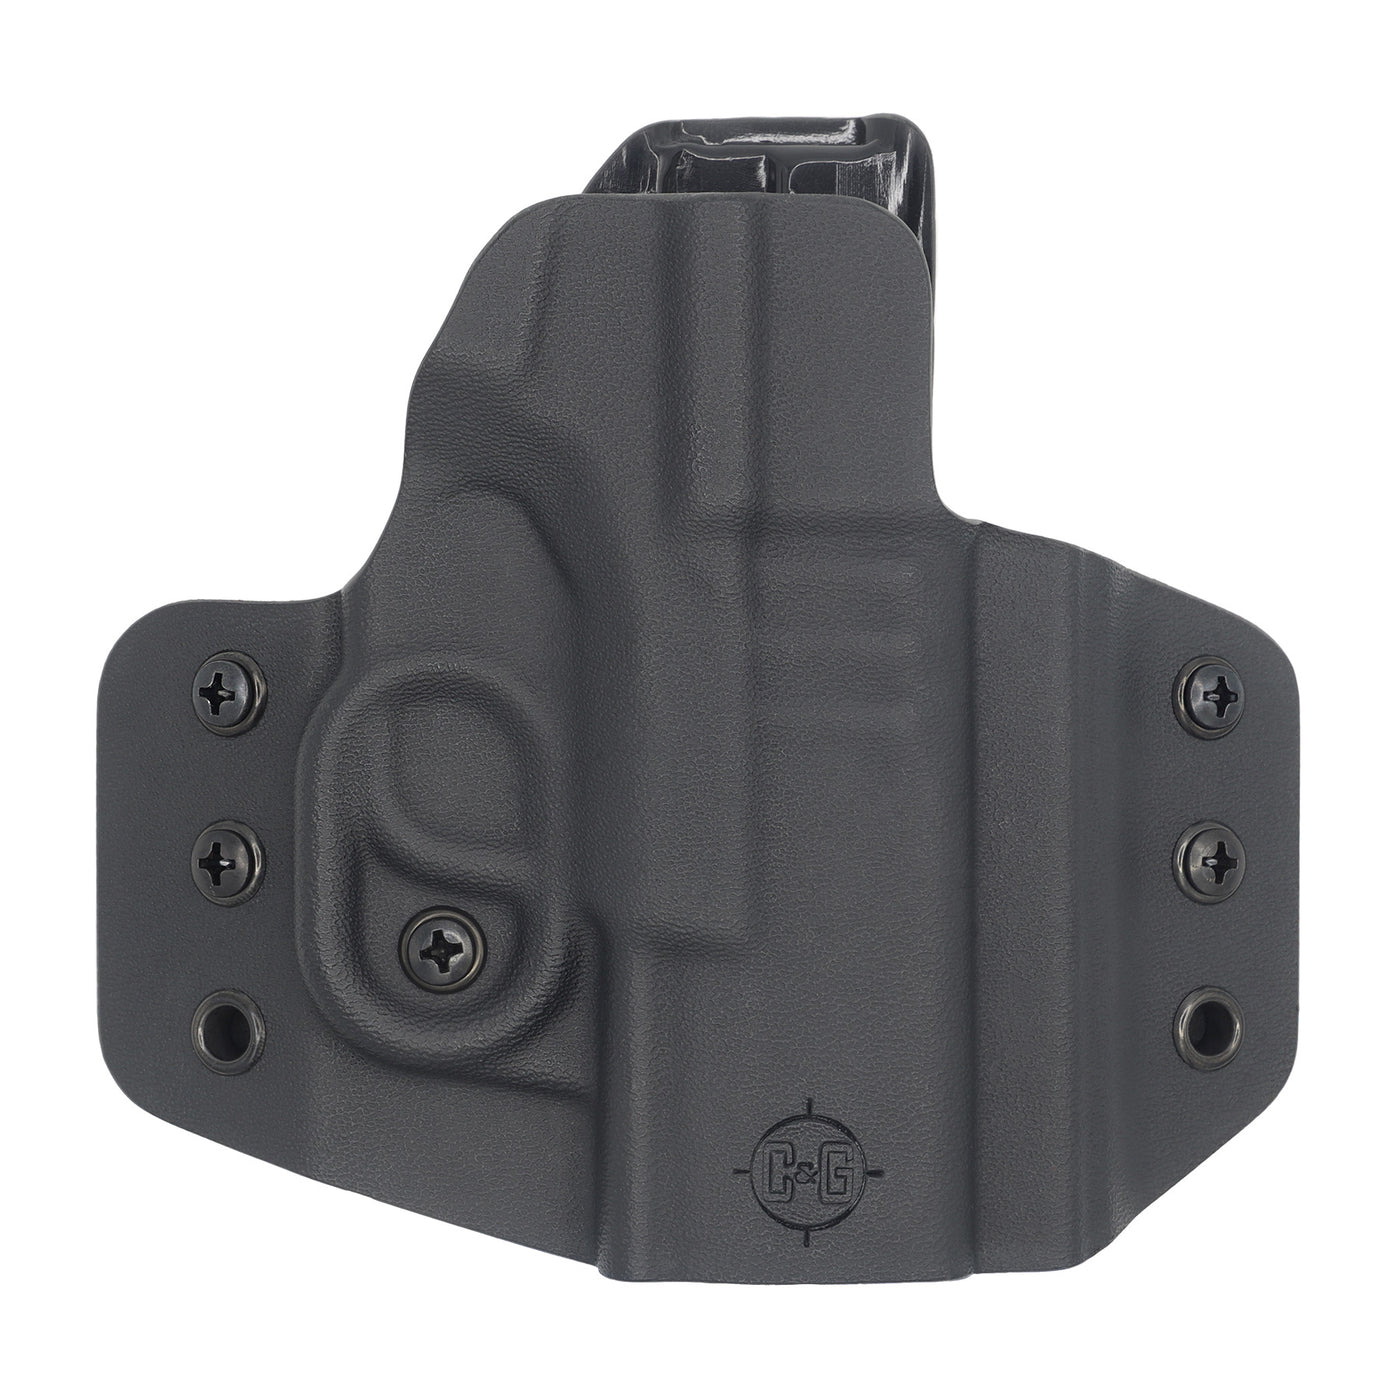 Quickship C&G Holsters Covert OWB holster for the Springfield Hellcat.